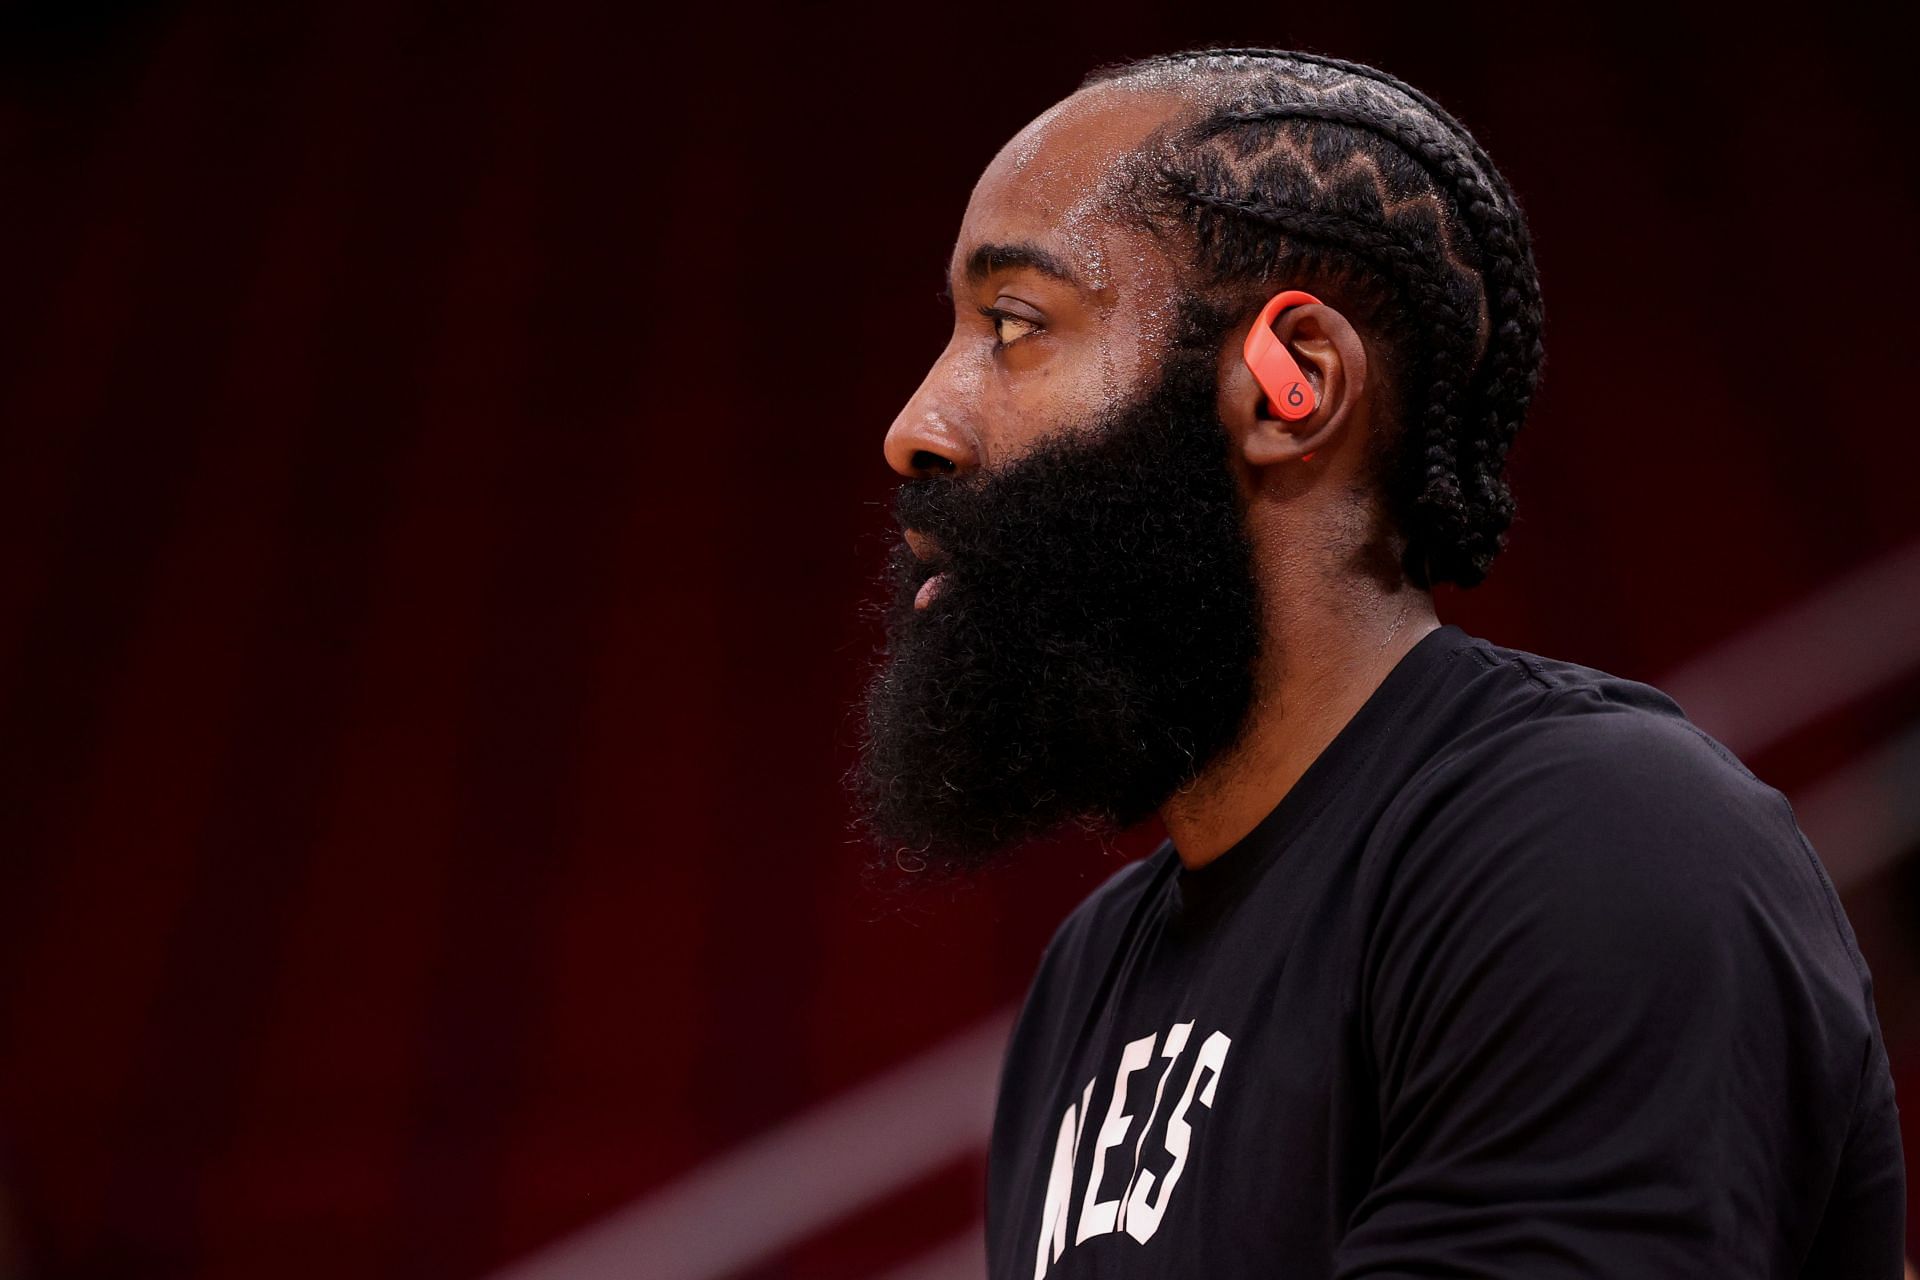 James Harden of the Brooklyn Nets warms up before facing the Houston Rockets on Dec. 8 in Texas.